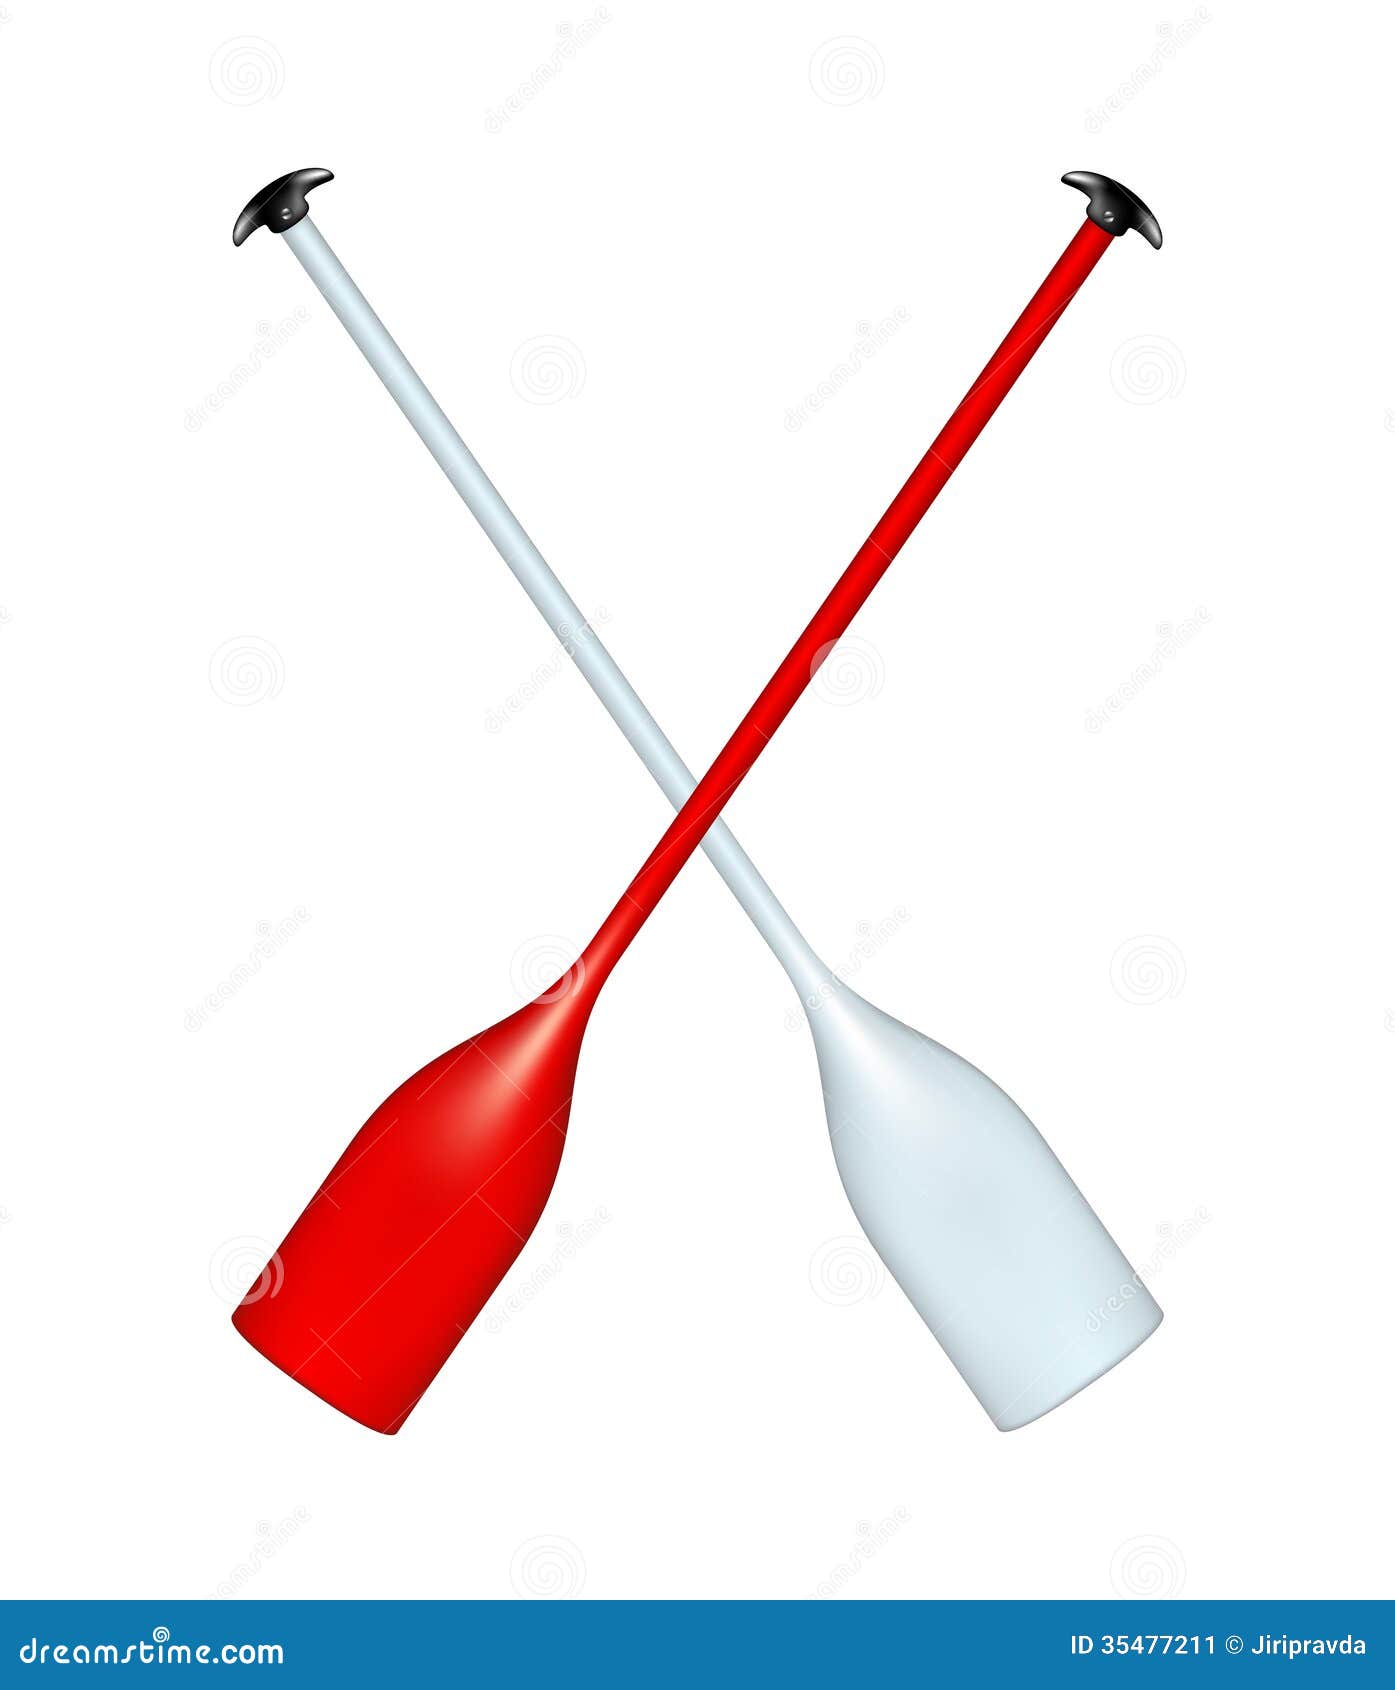 Two Crossed Paddles Stock Image - Image: 35477211